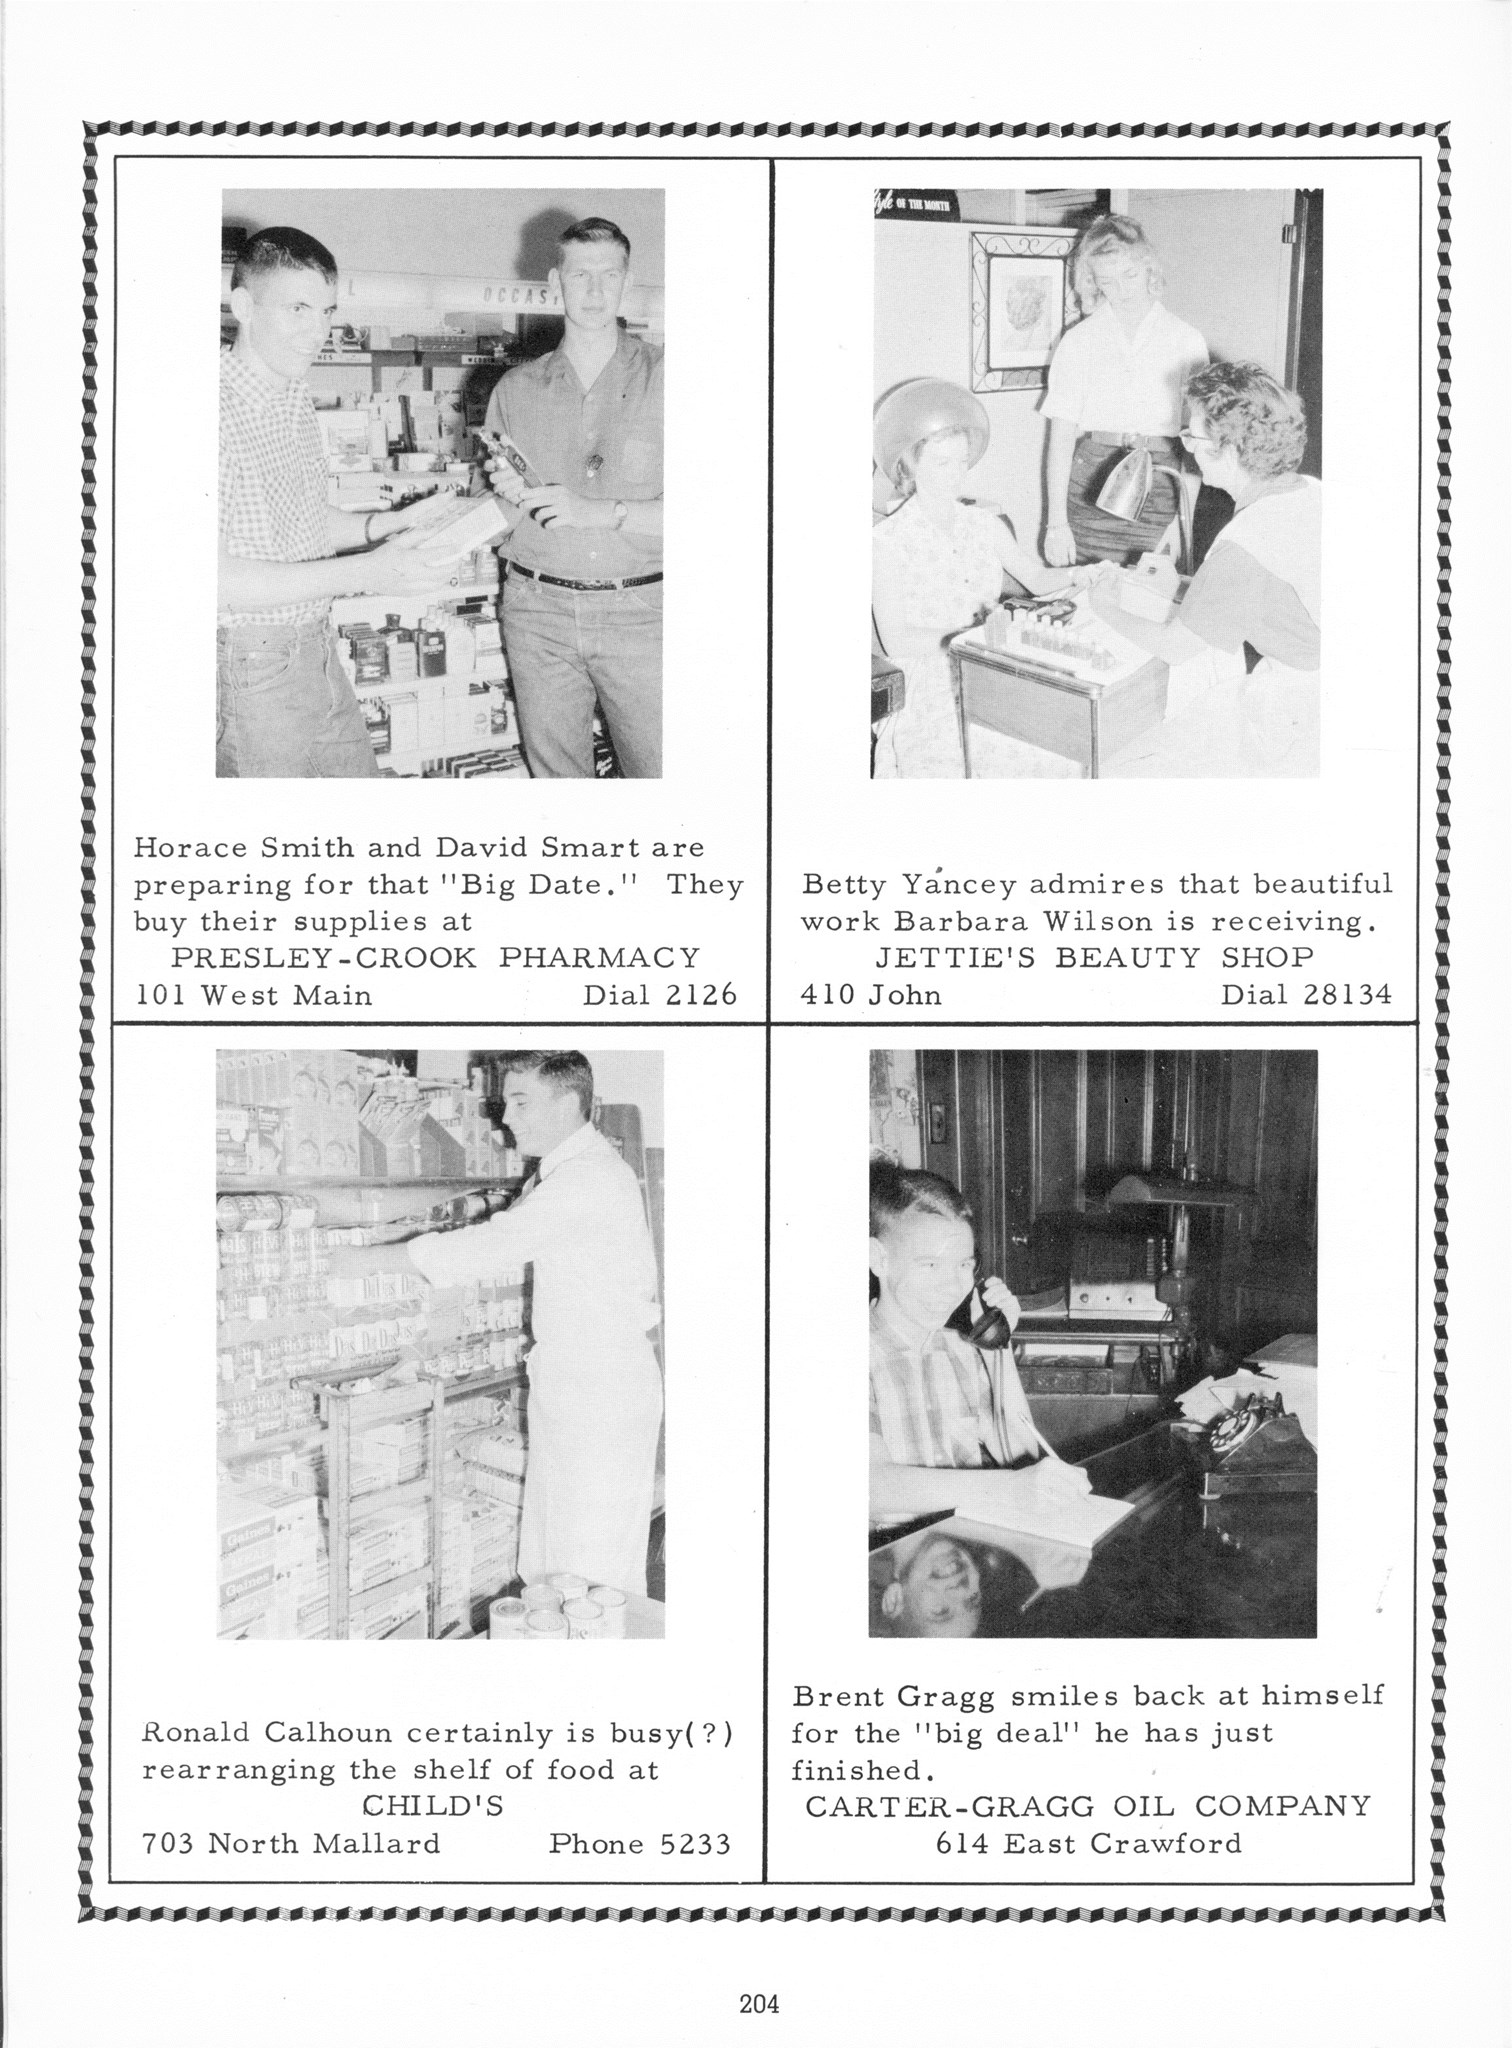 ../../../Images/Large/1960/Arclight-1960-pg0204.jpg